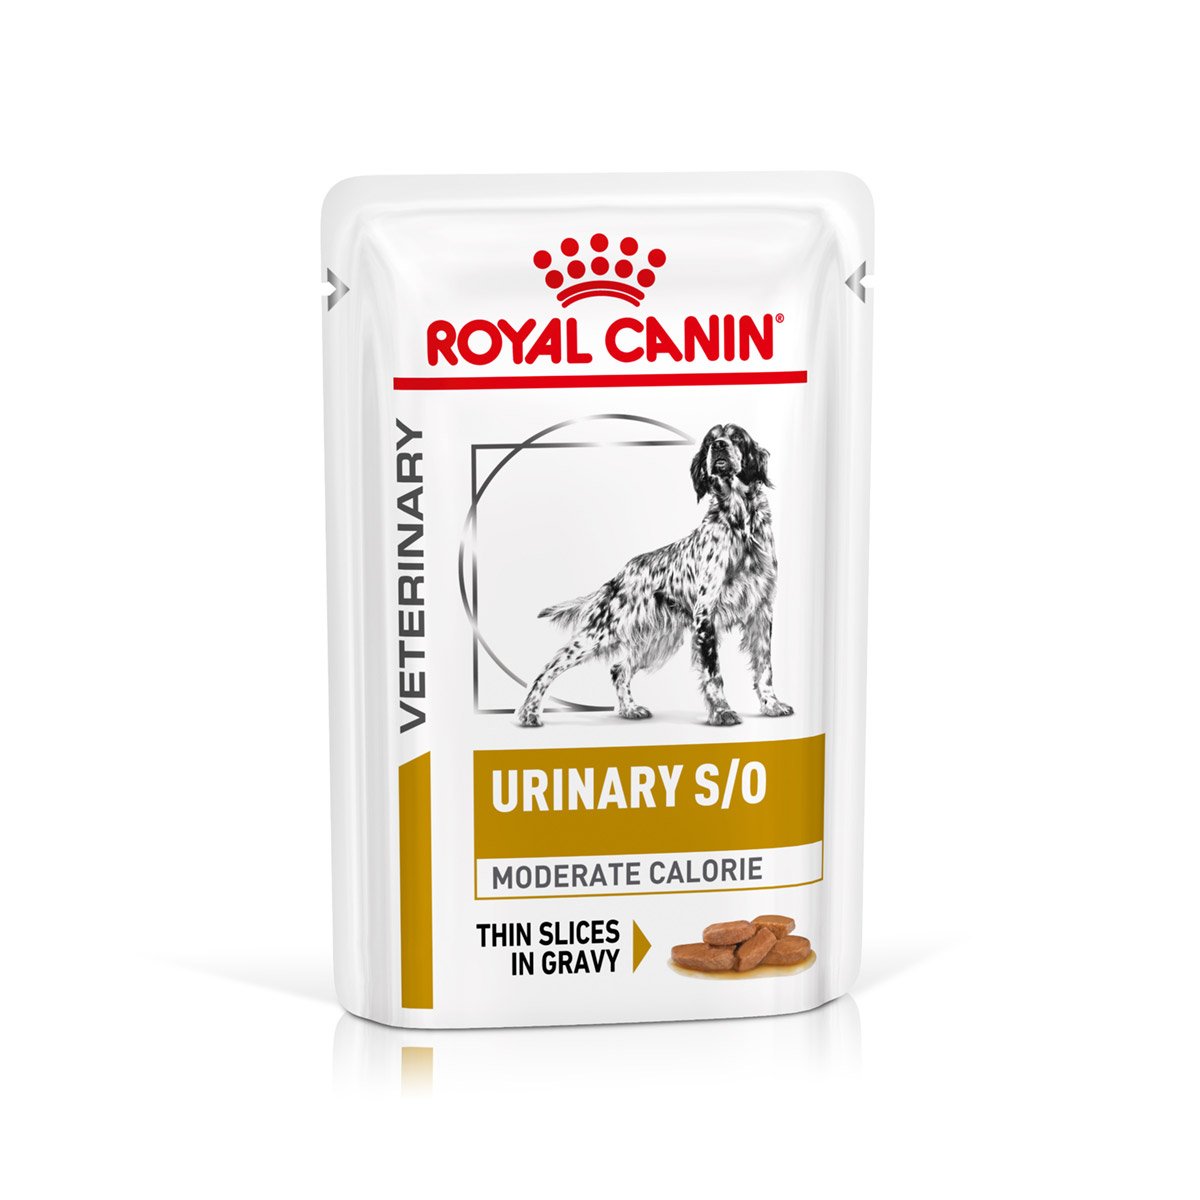 ROYAL CANIN® Veterinary URINARY S/O MODERATE CALORIE Nassfutter für Hunde 12x100g von Royal Canin